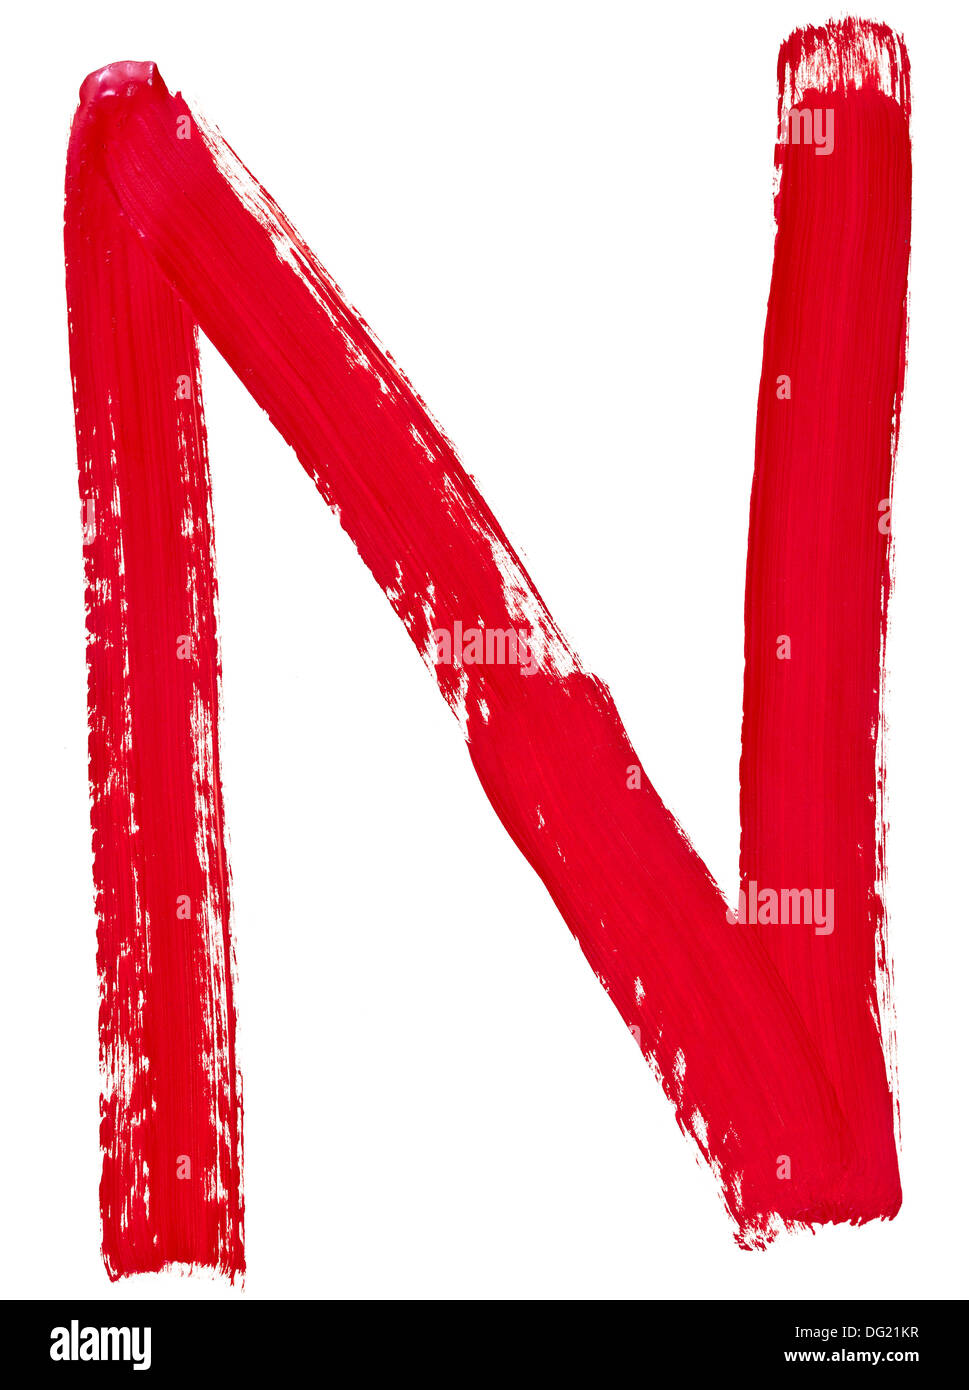 capital letter n hand painted by red brush on white background Stock Photo